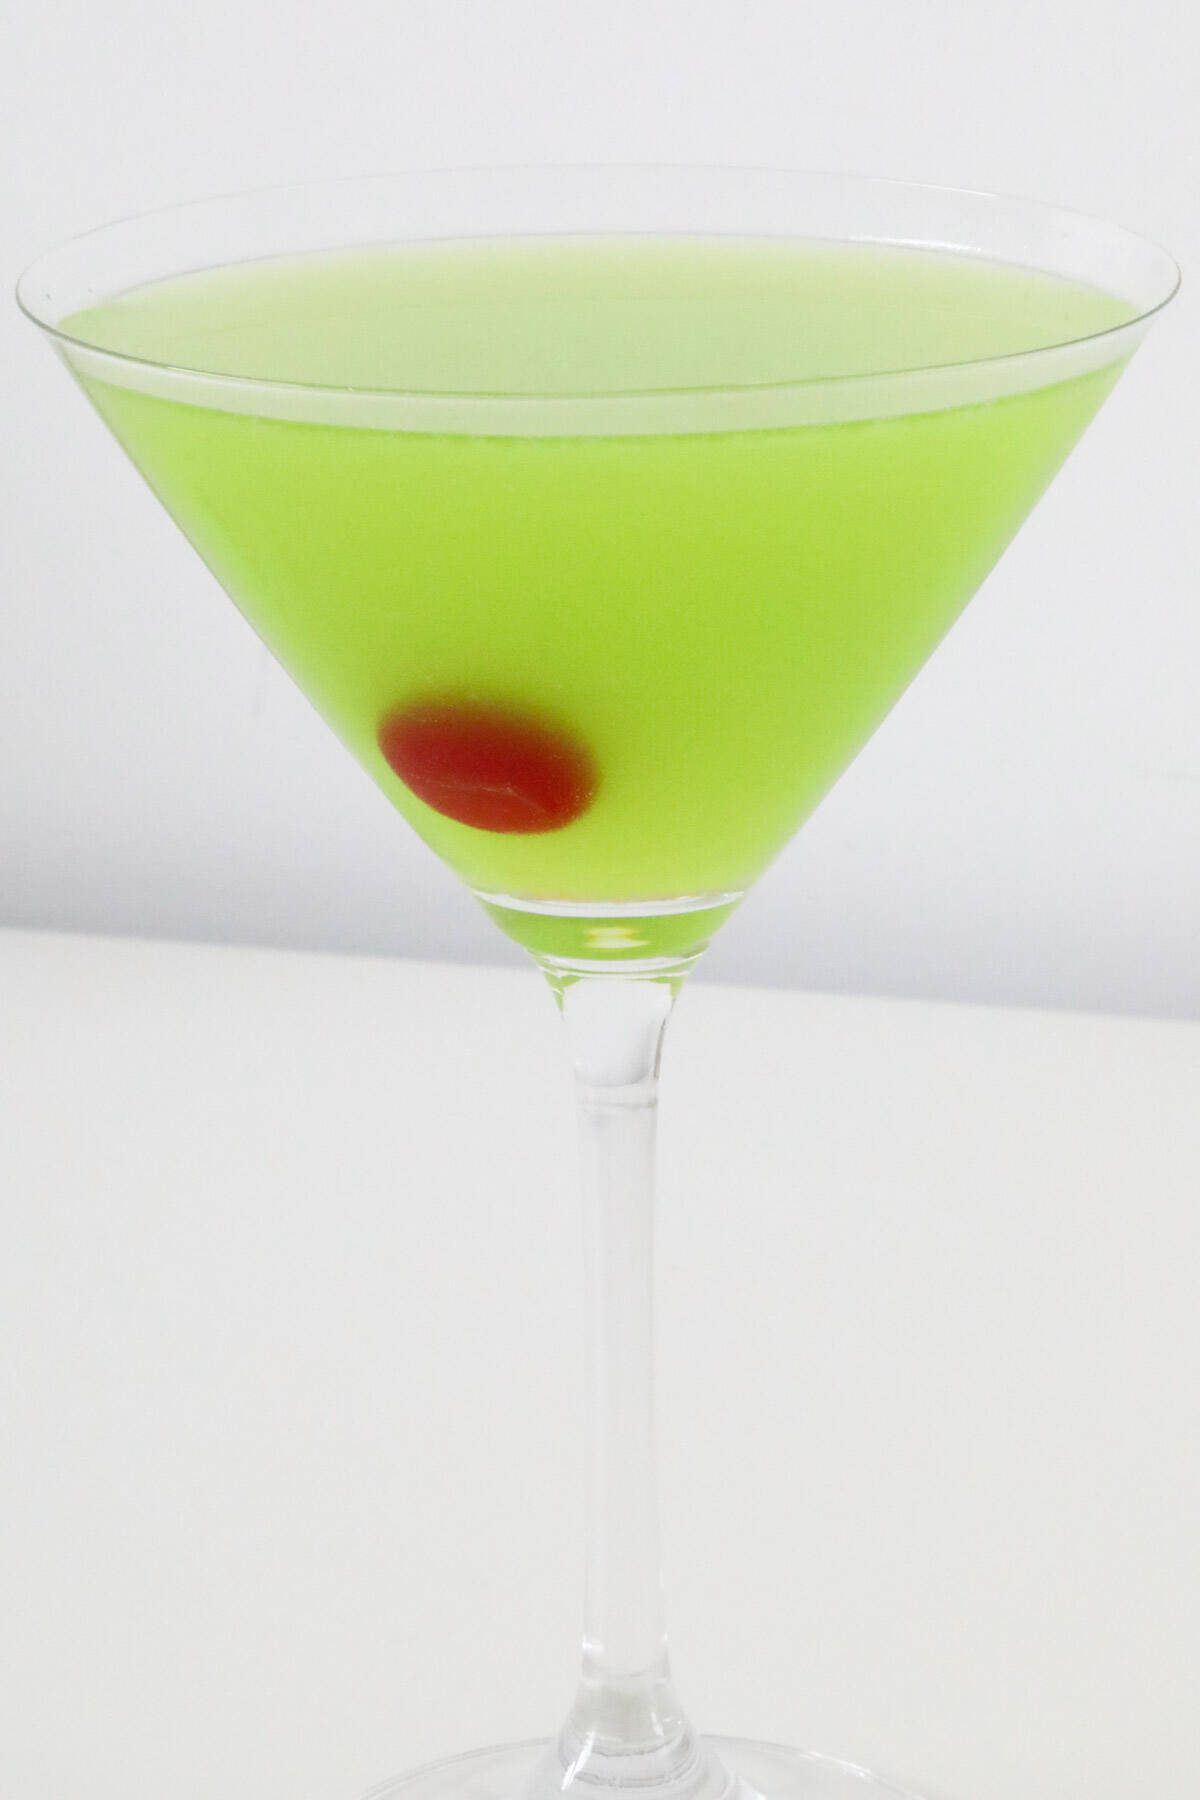 An icy cold pale green cocktail with a cherry, in a martini glass.